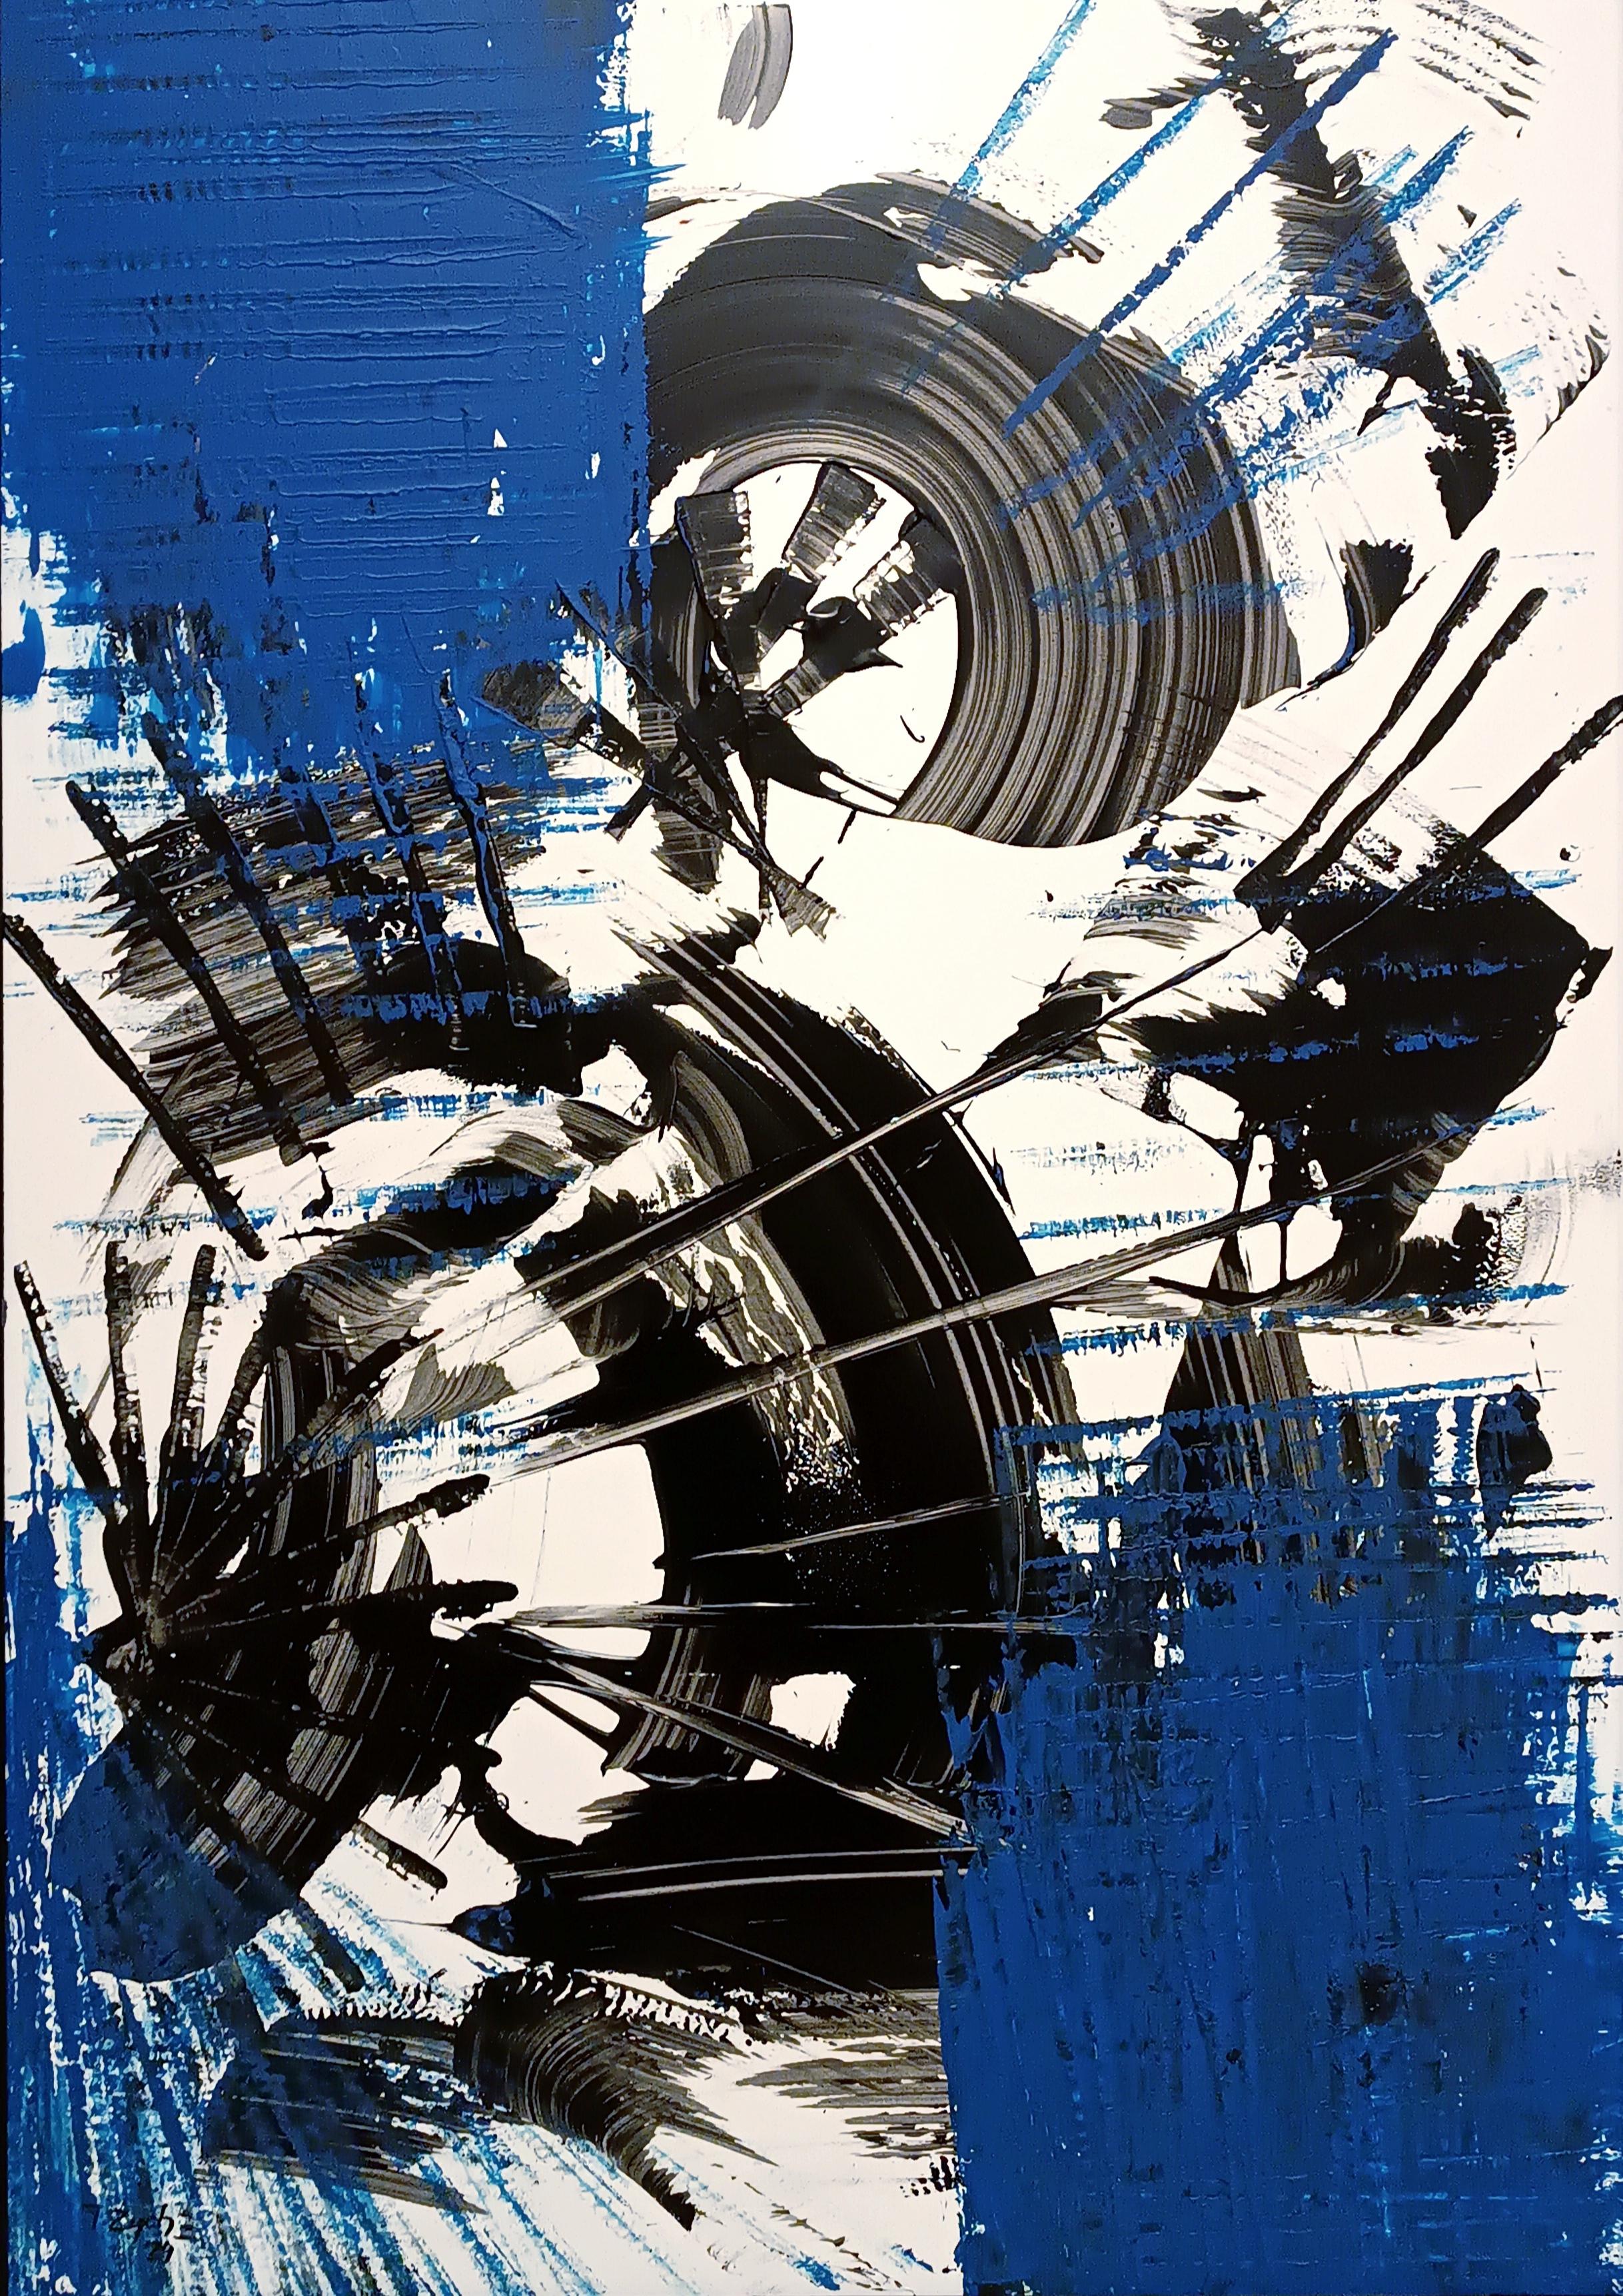 Tadeusz Zych Abstract Painting - "Speed in Paris" / Acrylic, oil on PVC / 100 x 70 cm 